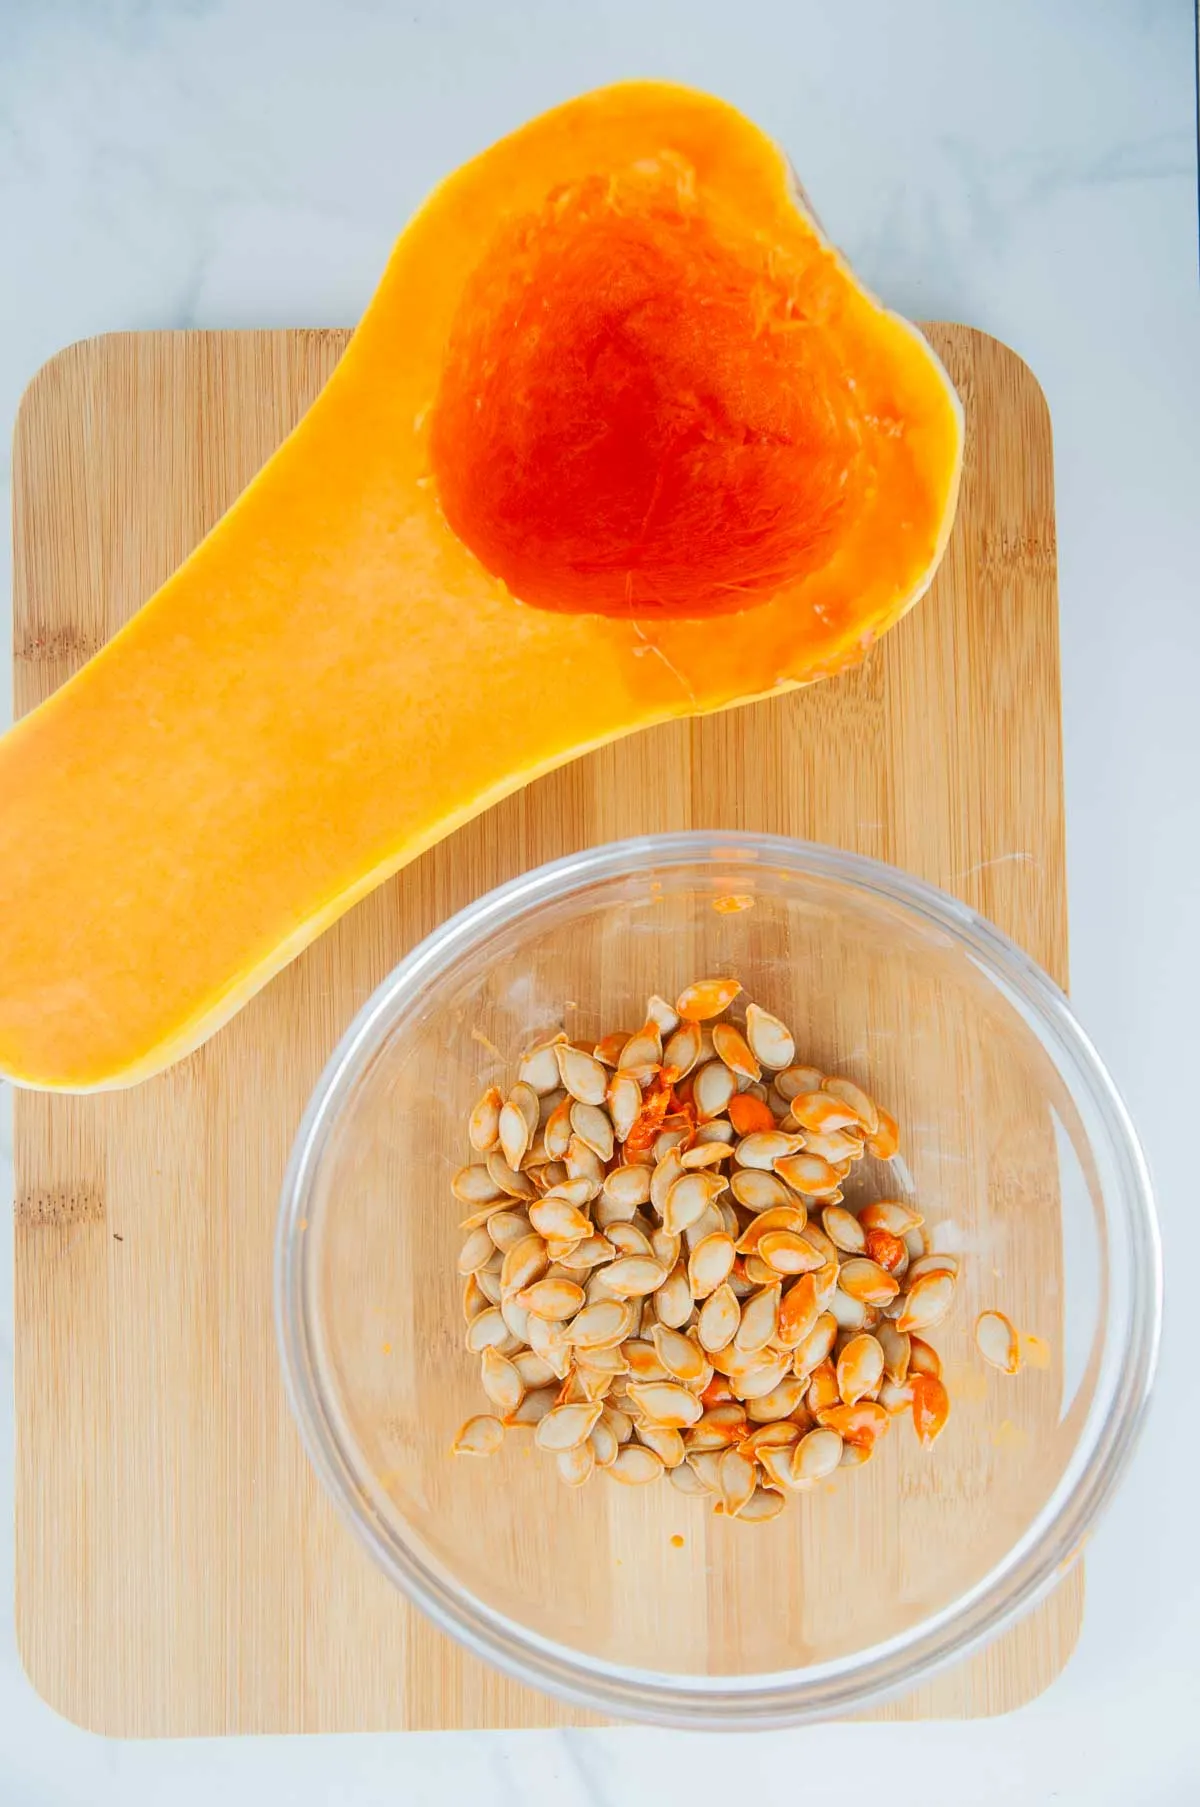 The seeds after you scoop them out of the butternut squash still need to be rinsed.